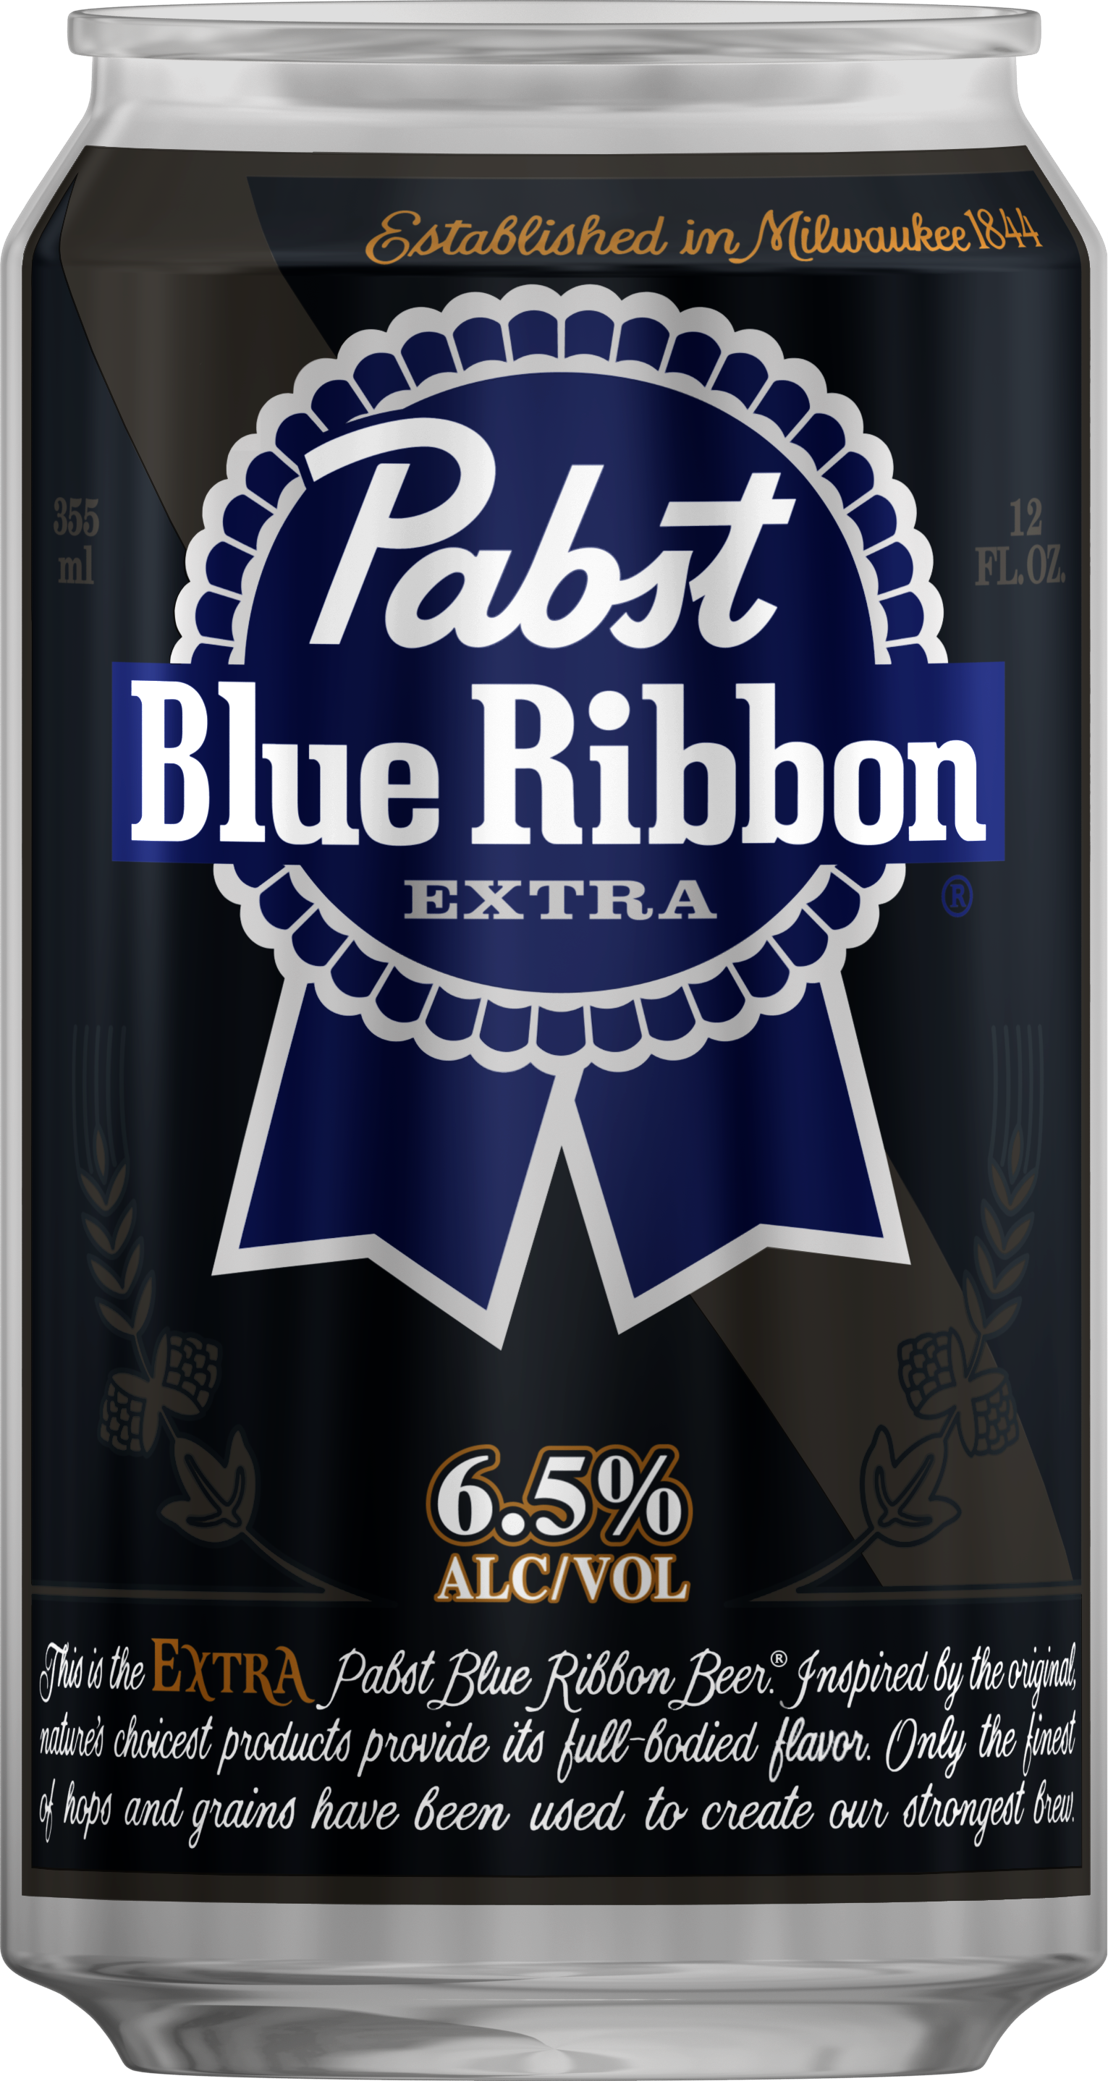 Pabst Blue Ribbon Introduces Two New Beers In 2019